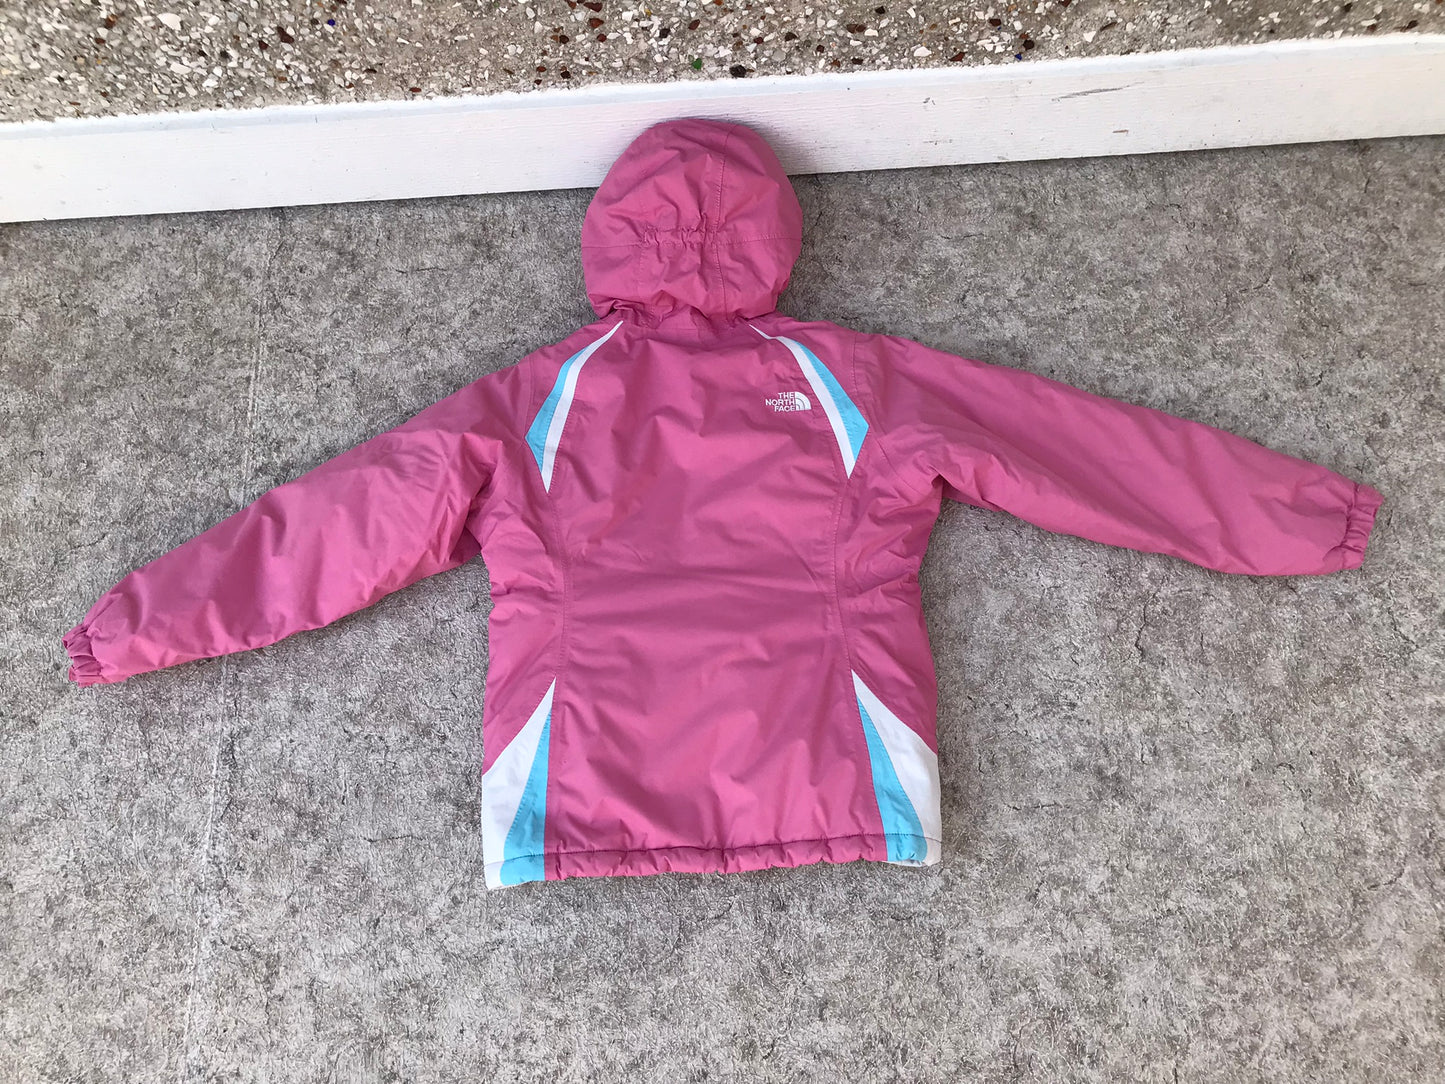 Winter Coat Child Size 10-12 The North Face Pink Blue Excellent